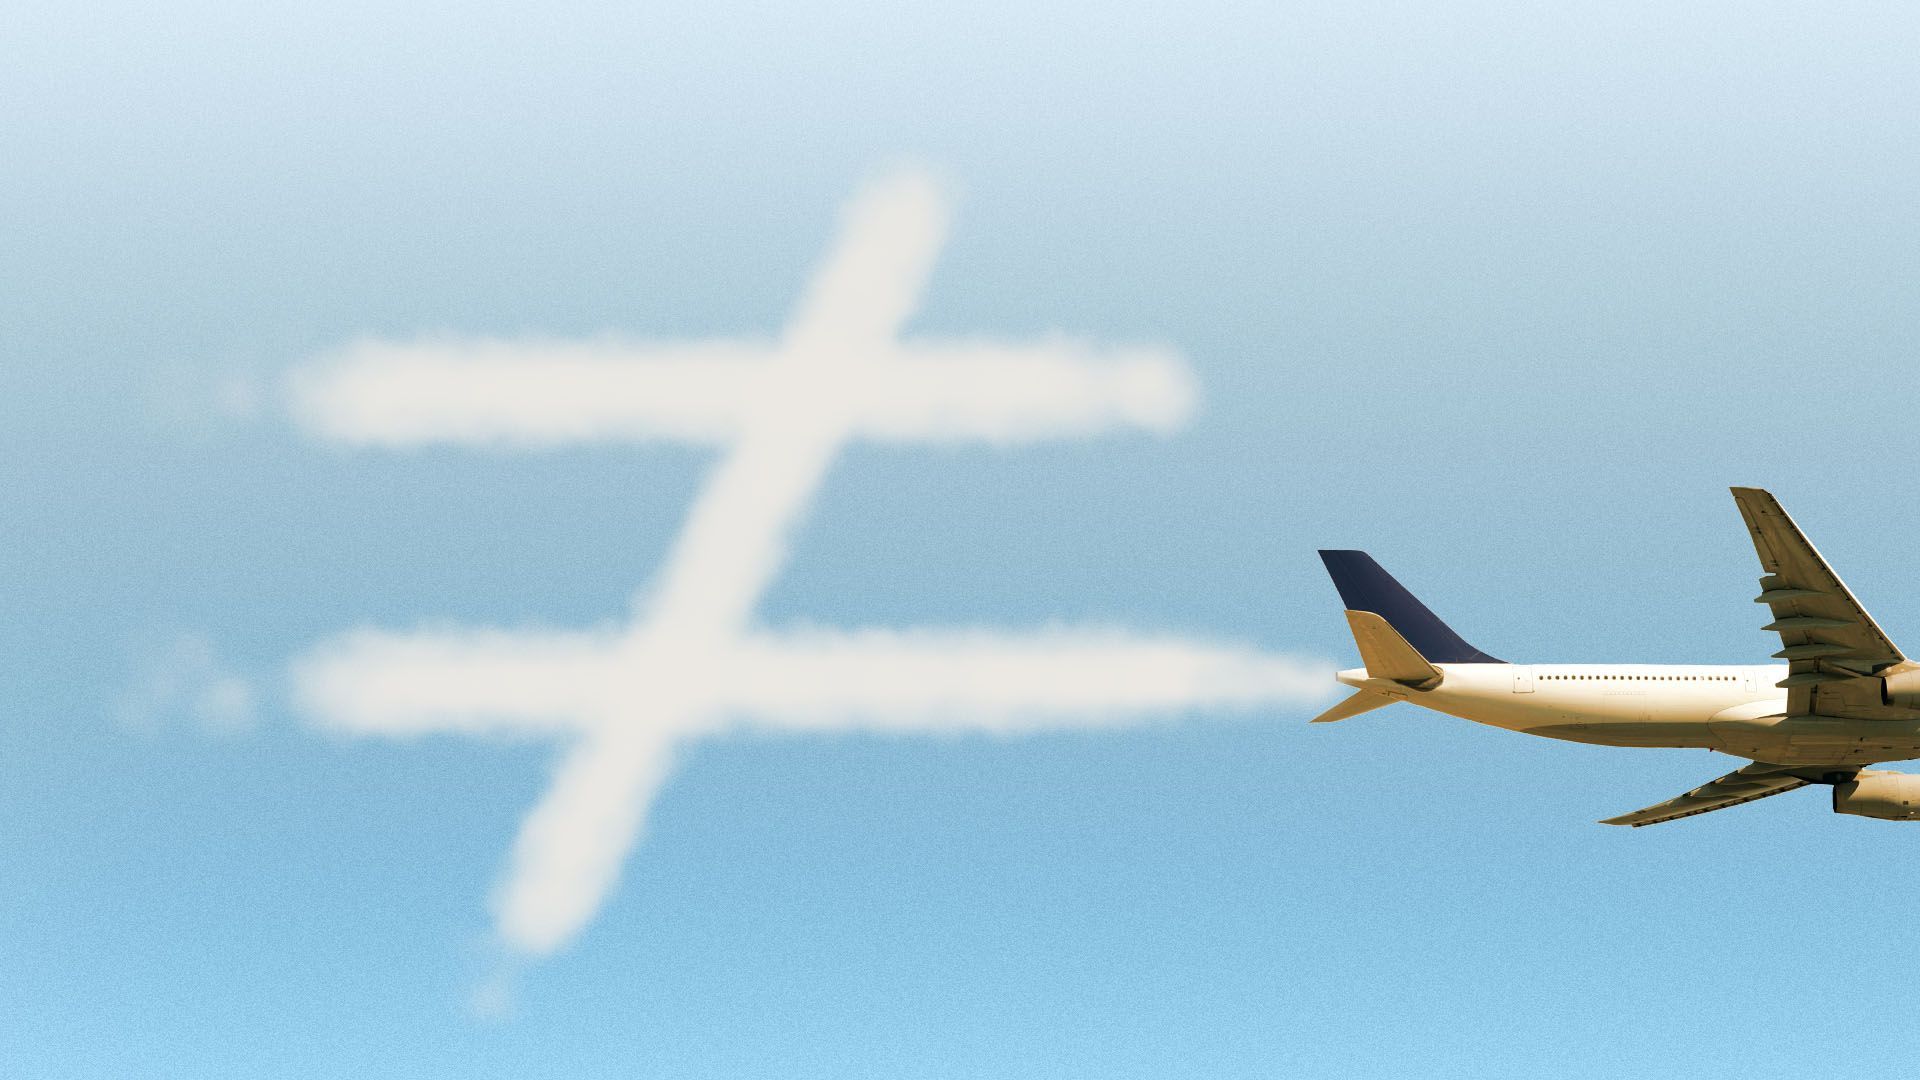 Illustration of an unequal sign made from an airplane contrail